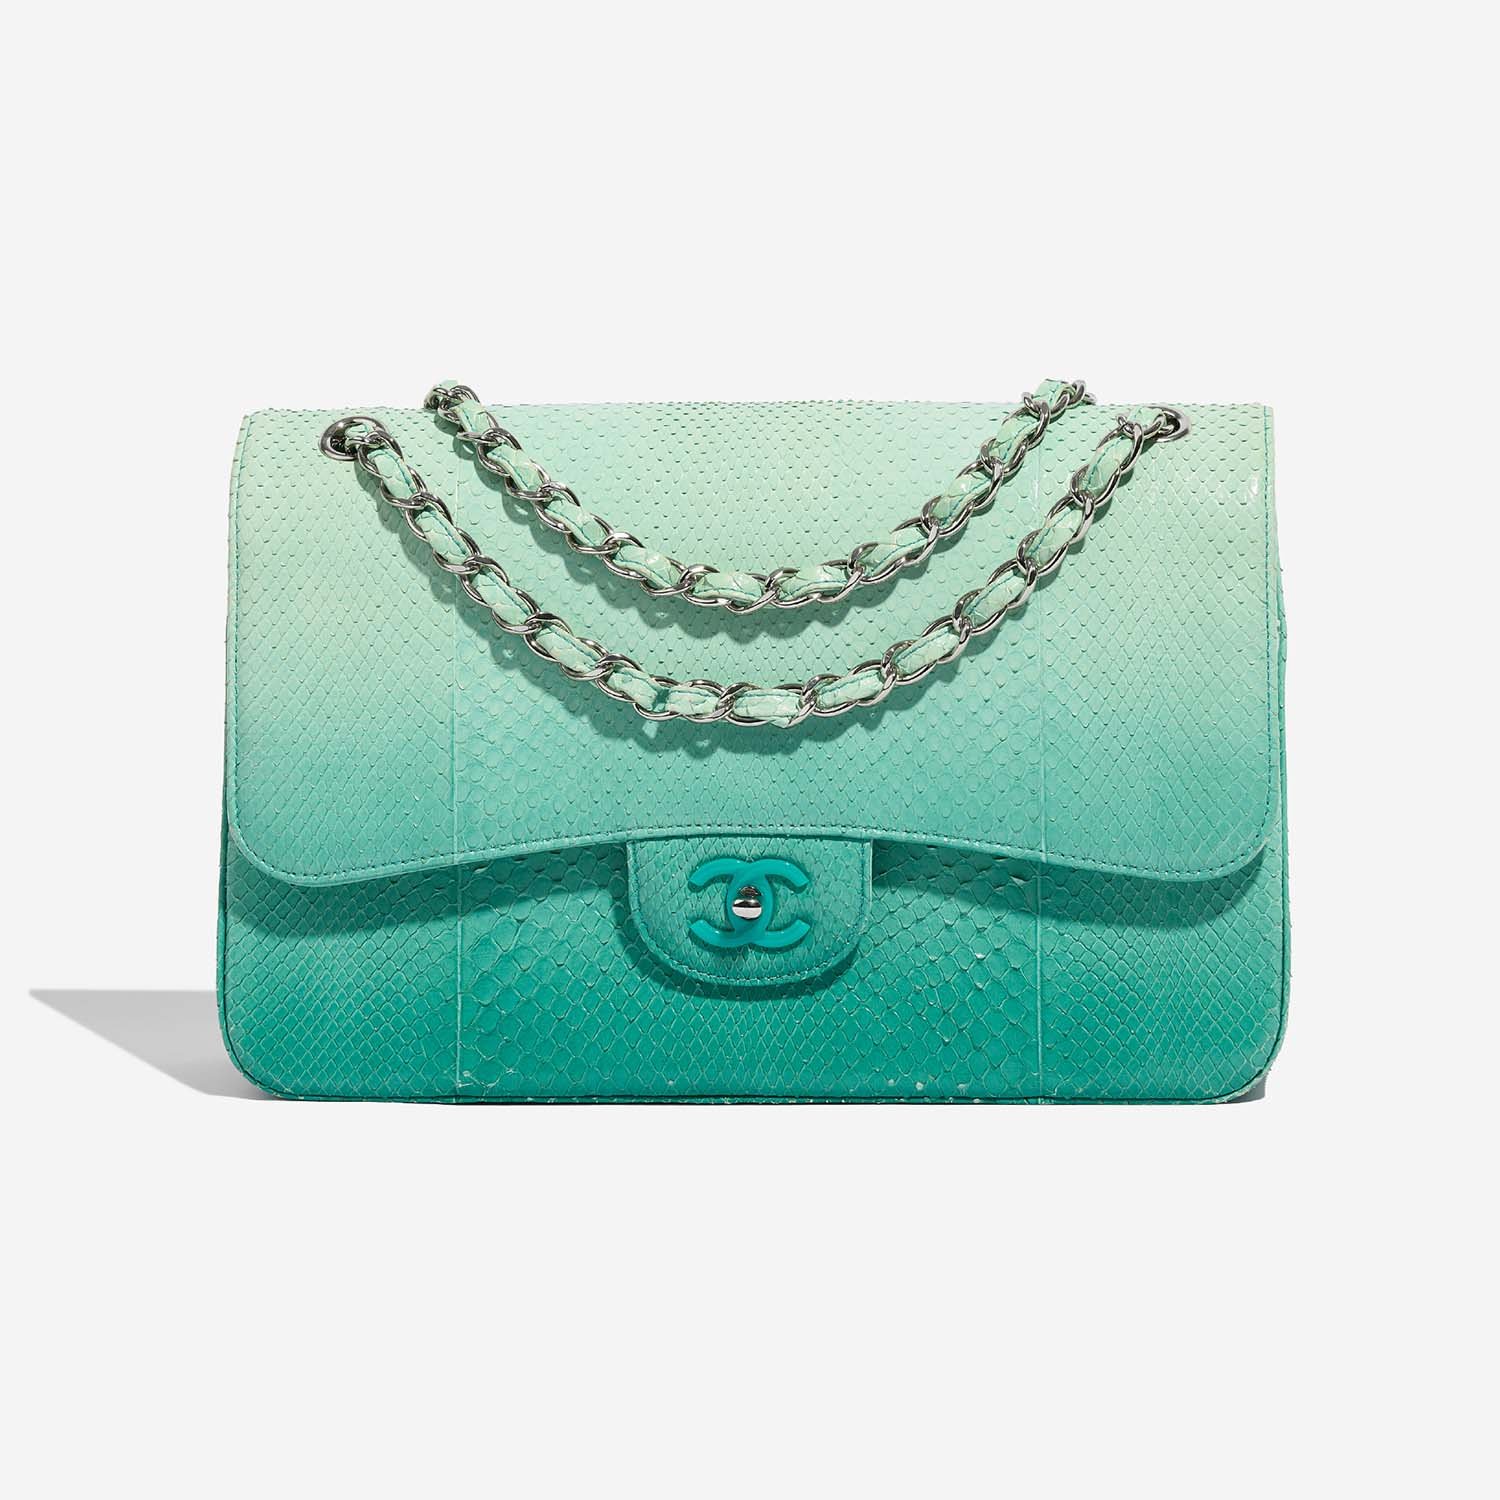 Chanel Jumbo Flap Bag In Turquoise Python Leather — Ufo No More